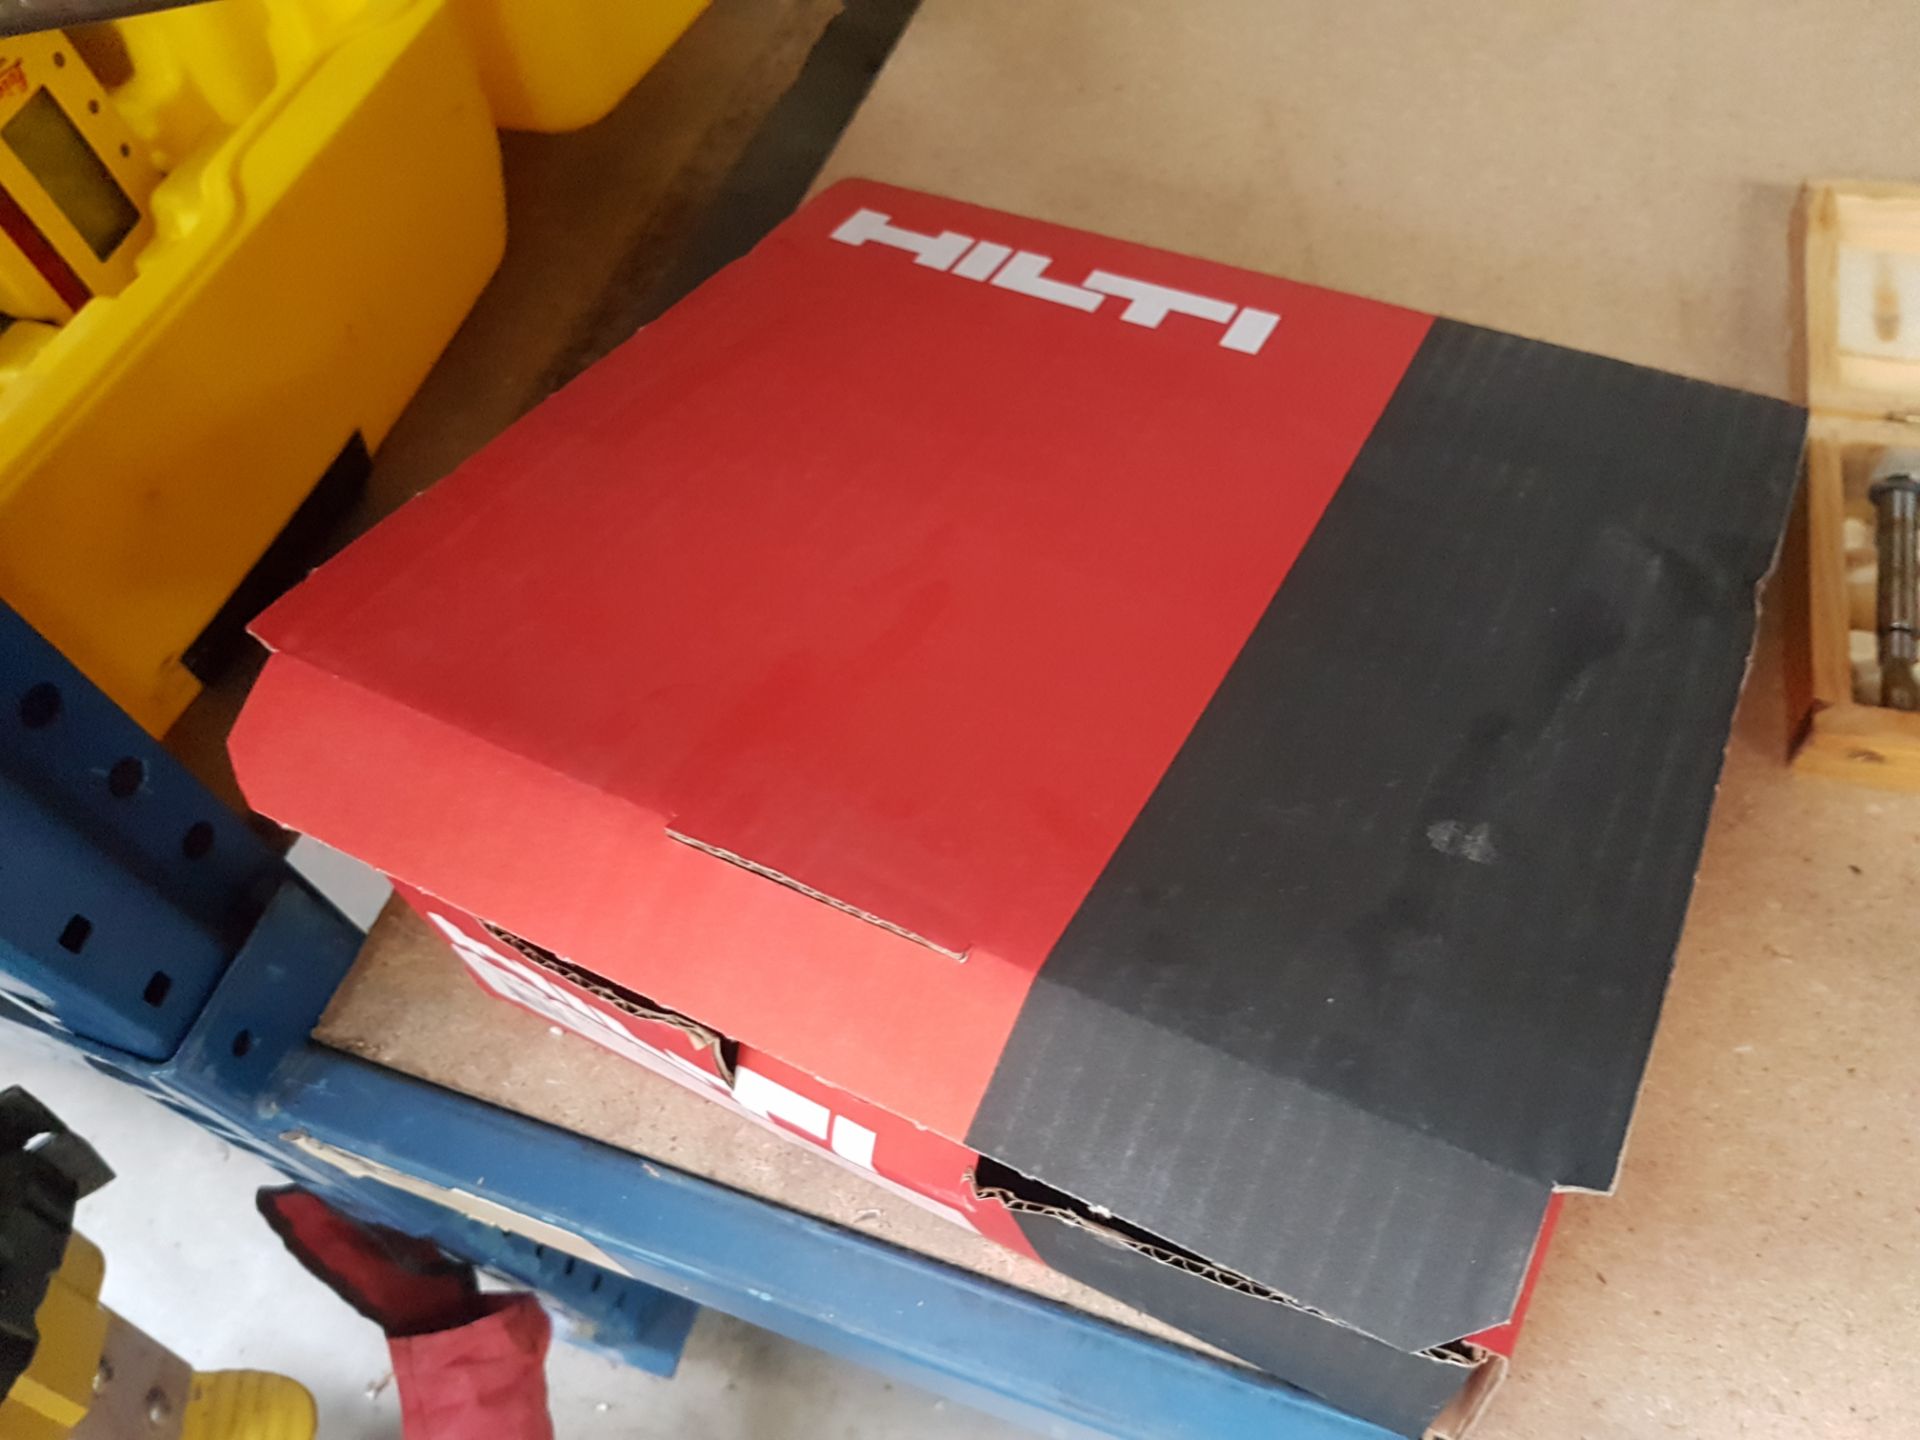 1 x Hilti TE3000-AVR 110v Cable With Original Box - CL303 - Location: North Wales LL14 - Image 3 of 3